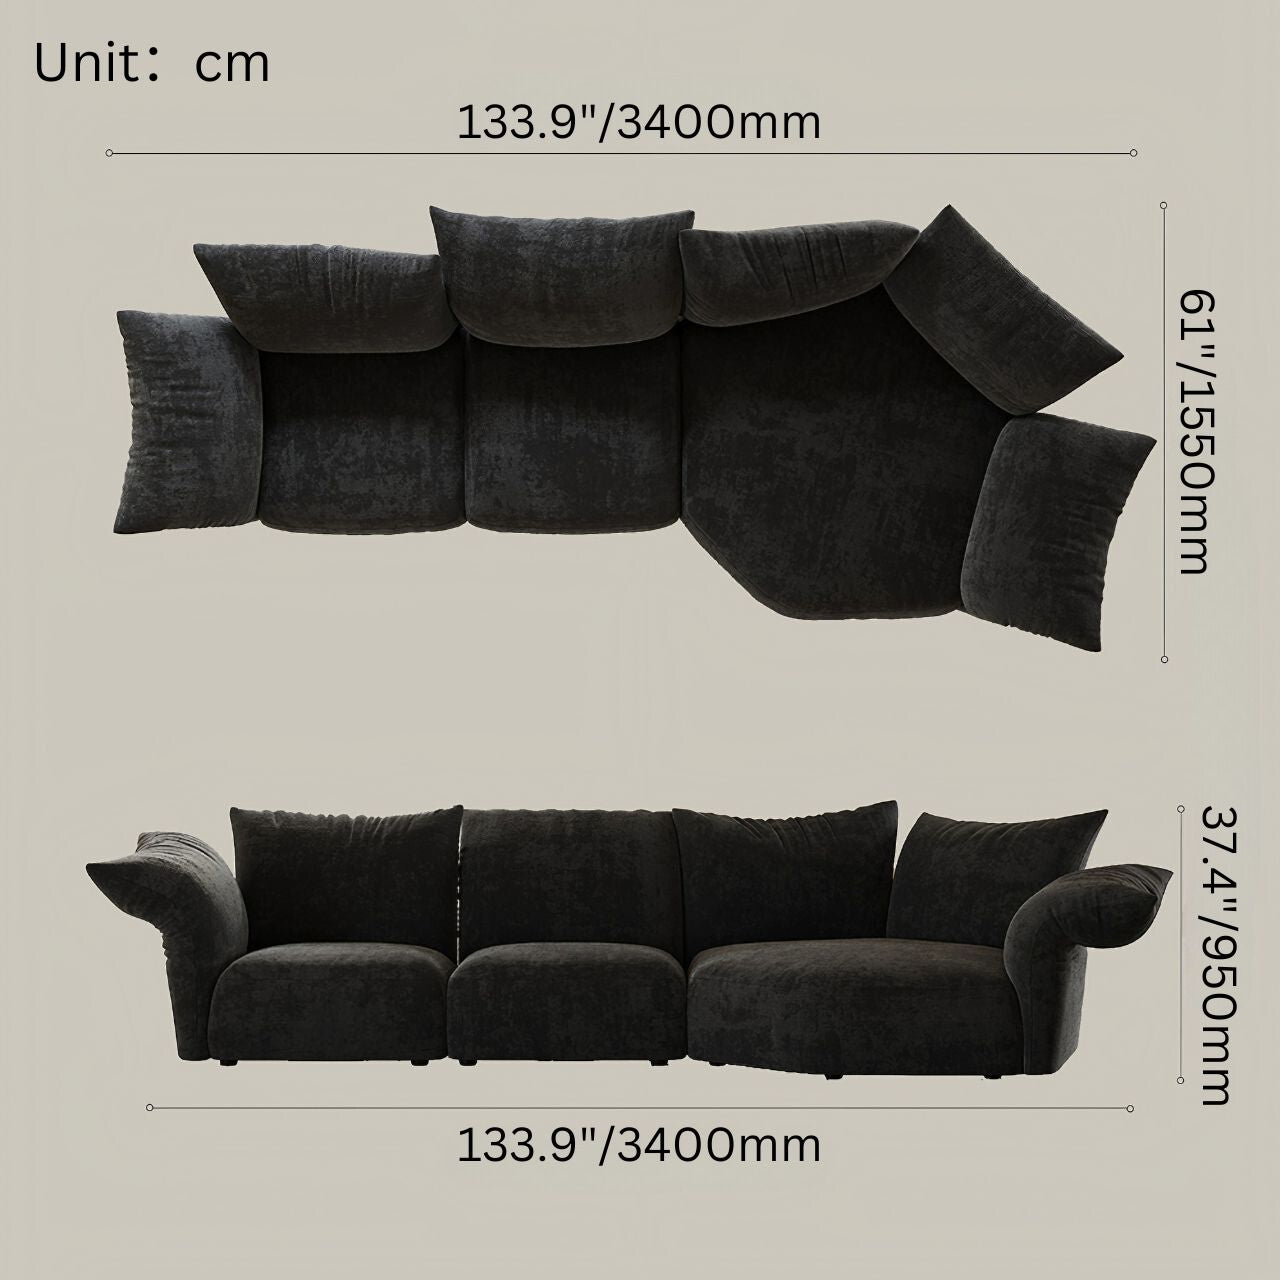 Chenille petal-shaped sofa in black with multiple seats for casual and comfortable home furniture